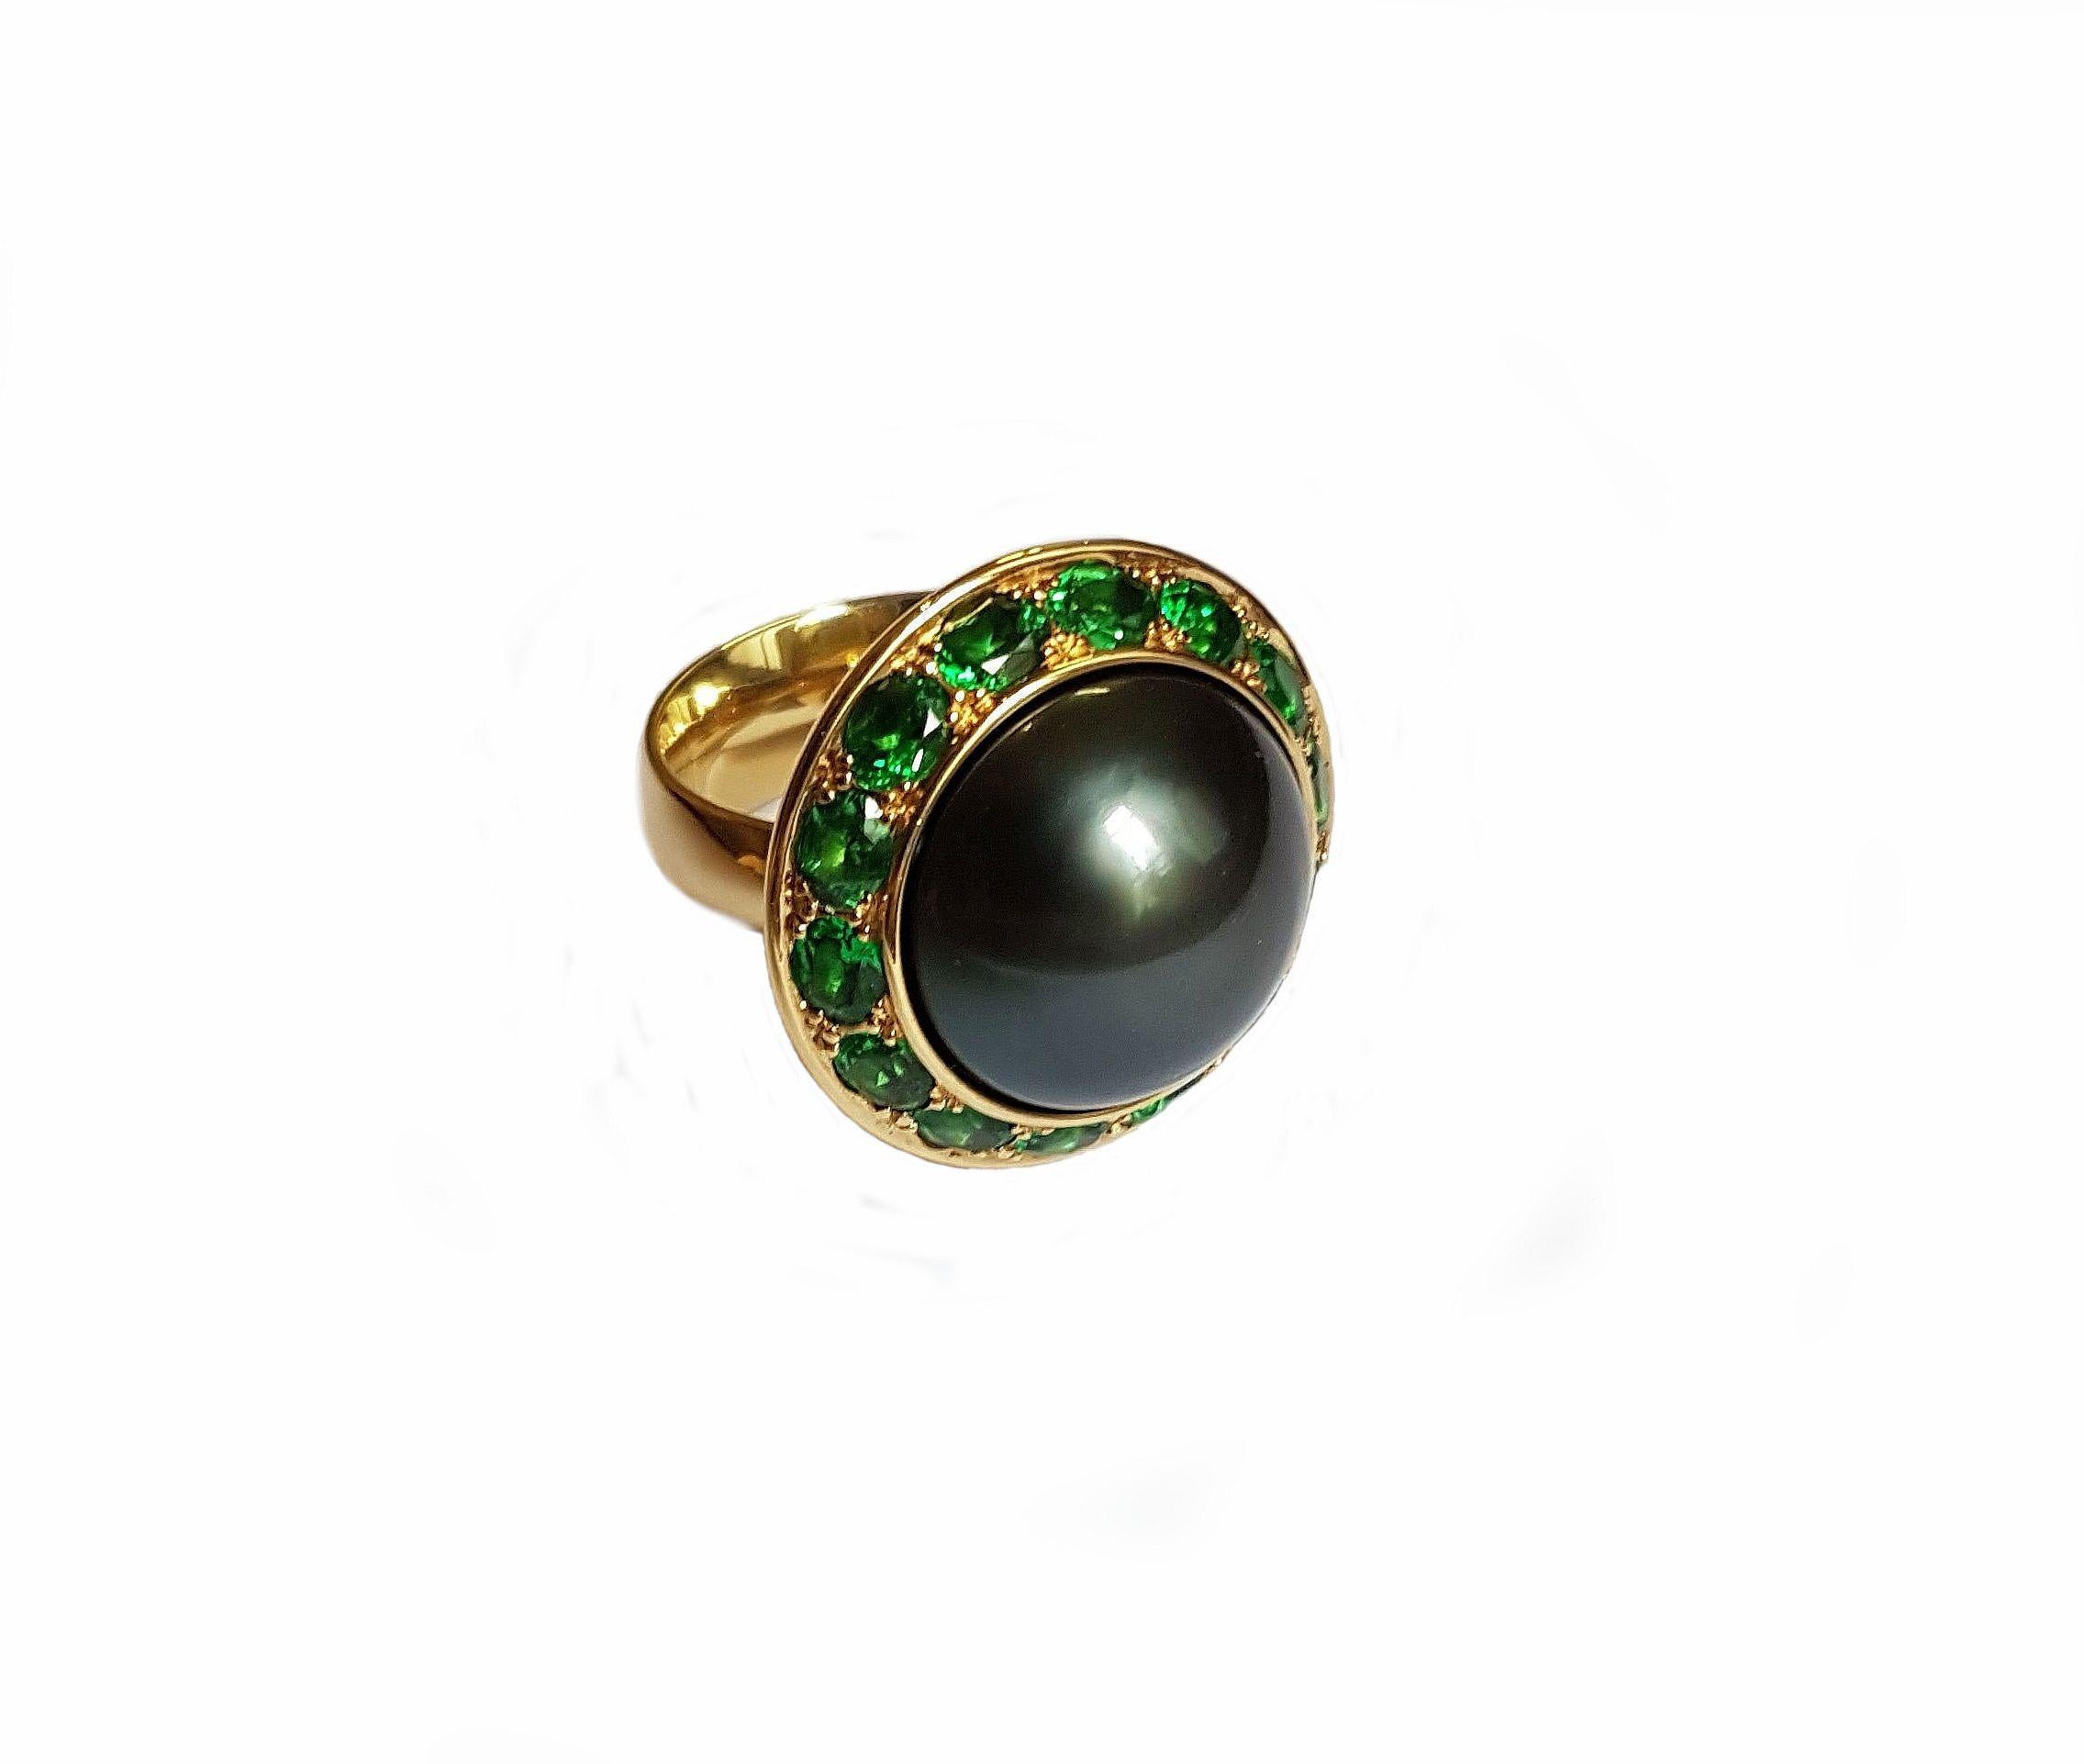 This gorgeous ring is made of 750/0 yellow gold and features an opulent natural colored Tahitian pearl of 16 mm with excellent luster, surrounded by 12 tsavorites with a total of 3.11 carats. 
This ring would make a spectacular gift that can be worn